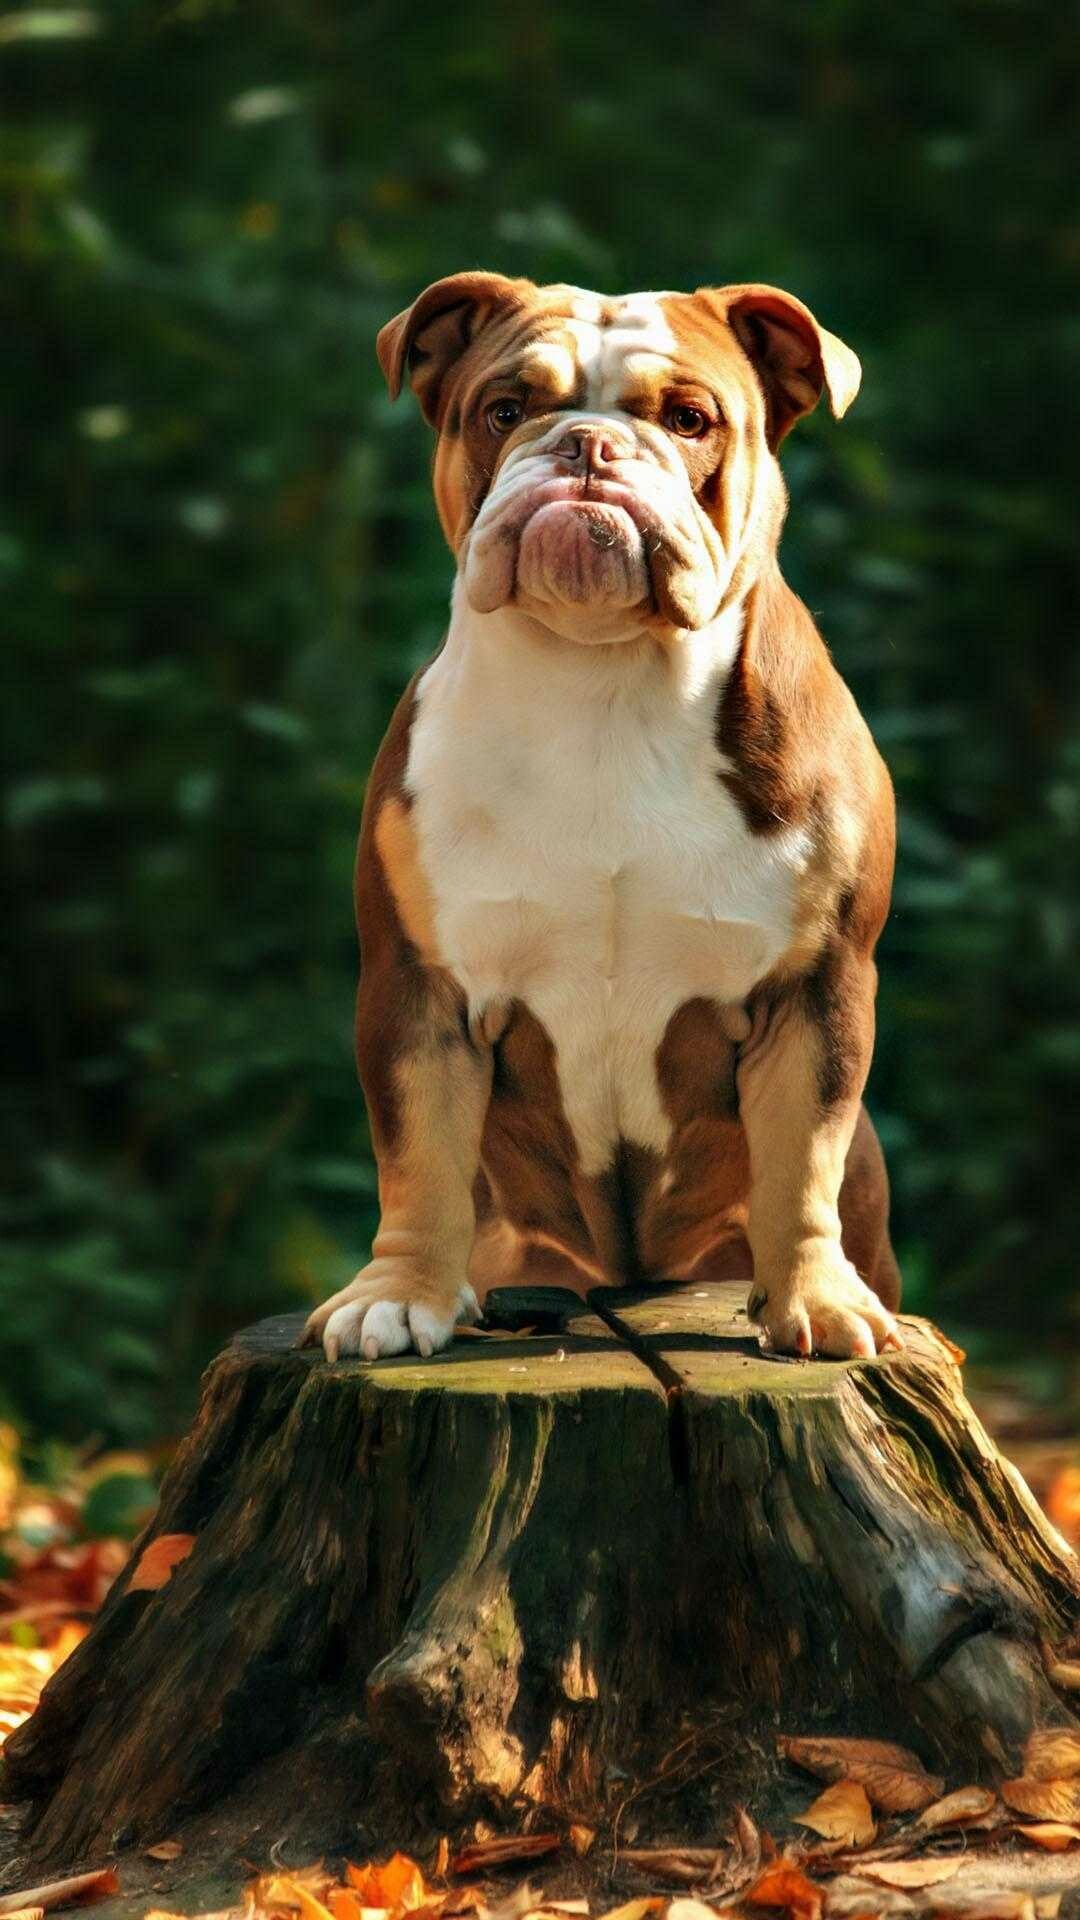 Bulldog: The breed can be taught to perform tricks, including skateboarding. 1080x1920 Full HD Background.